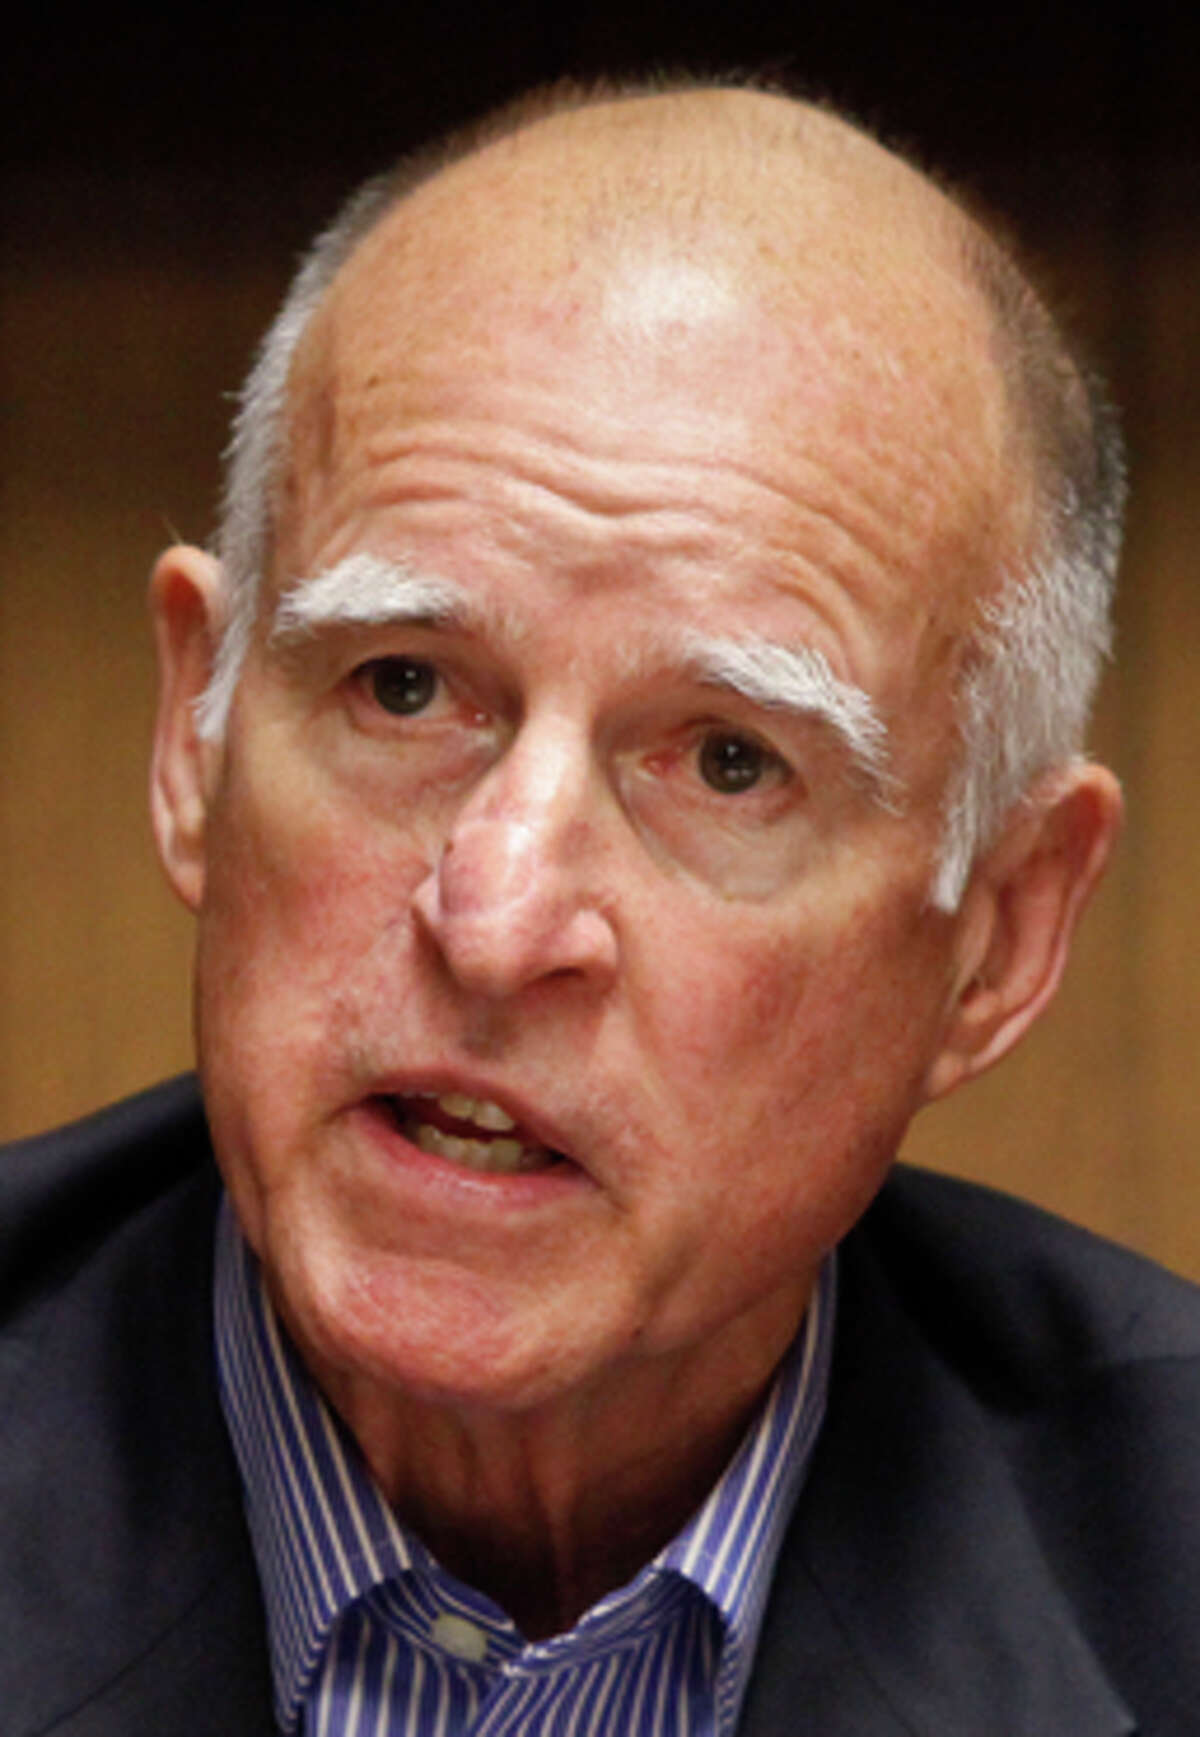 Gov. Jerry Brown has called for significant mandatory cuts.